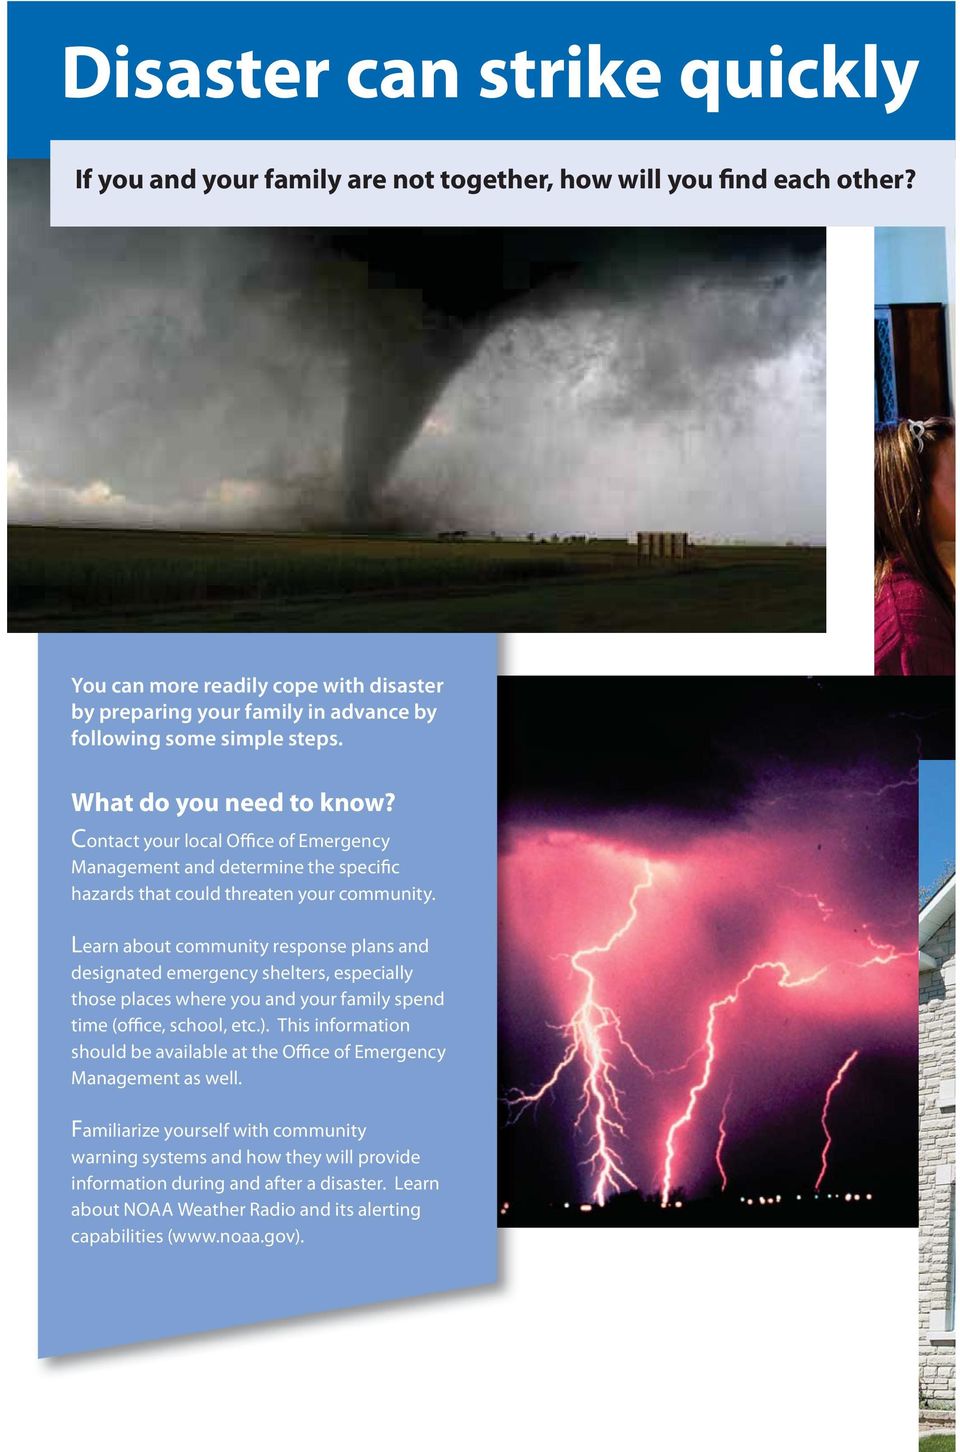 Contact your local Office of Emergency Management and determine the specific hazards that could threaten your community.